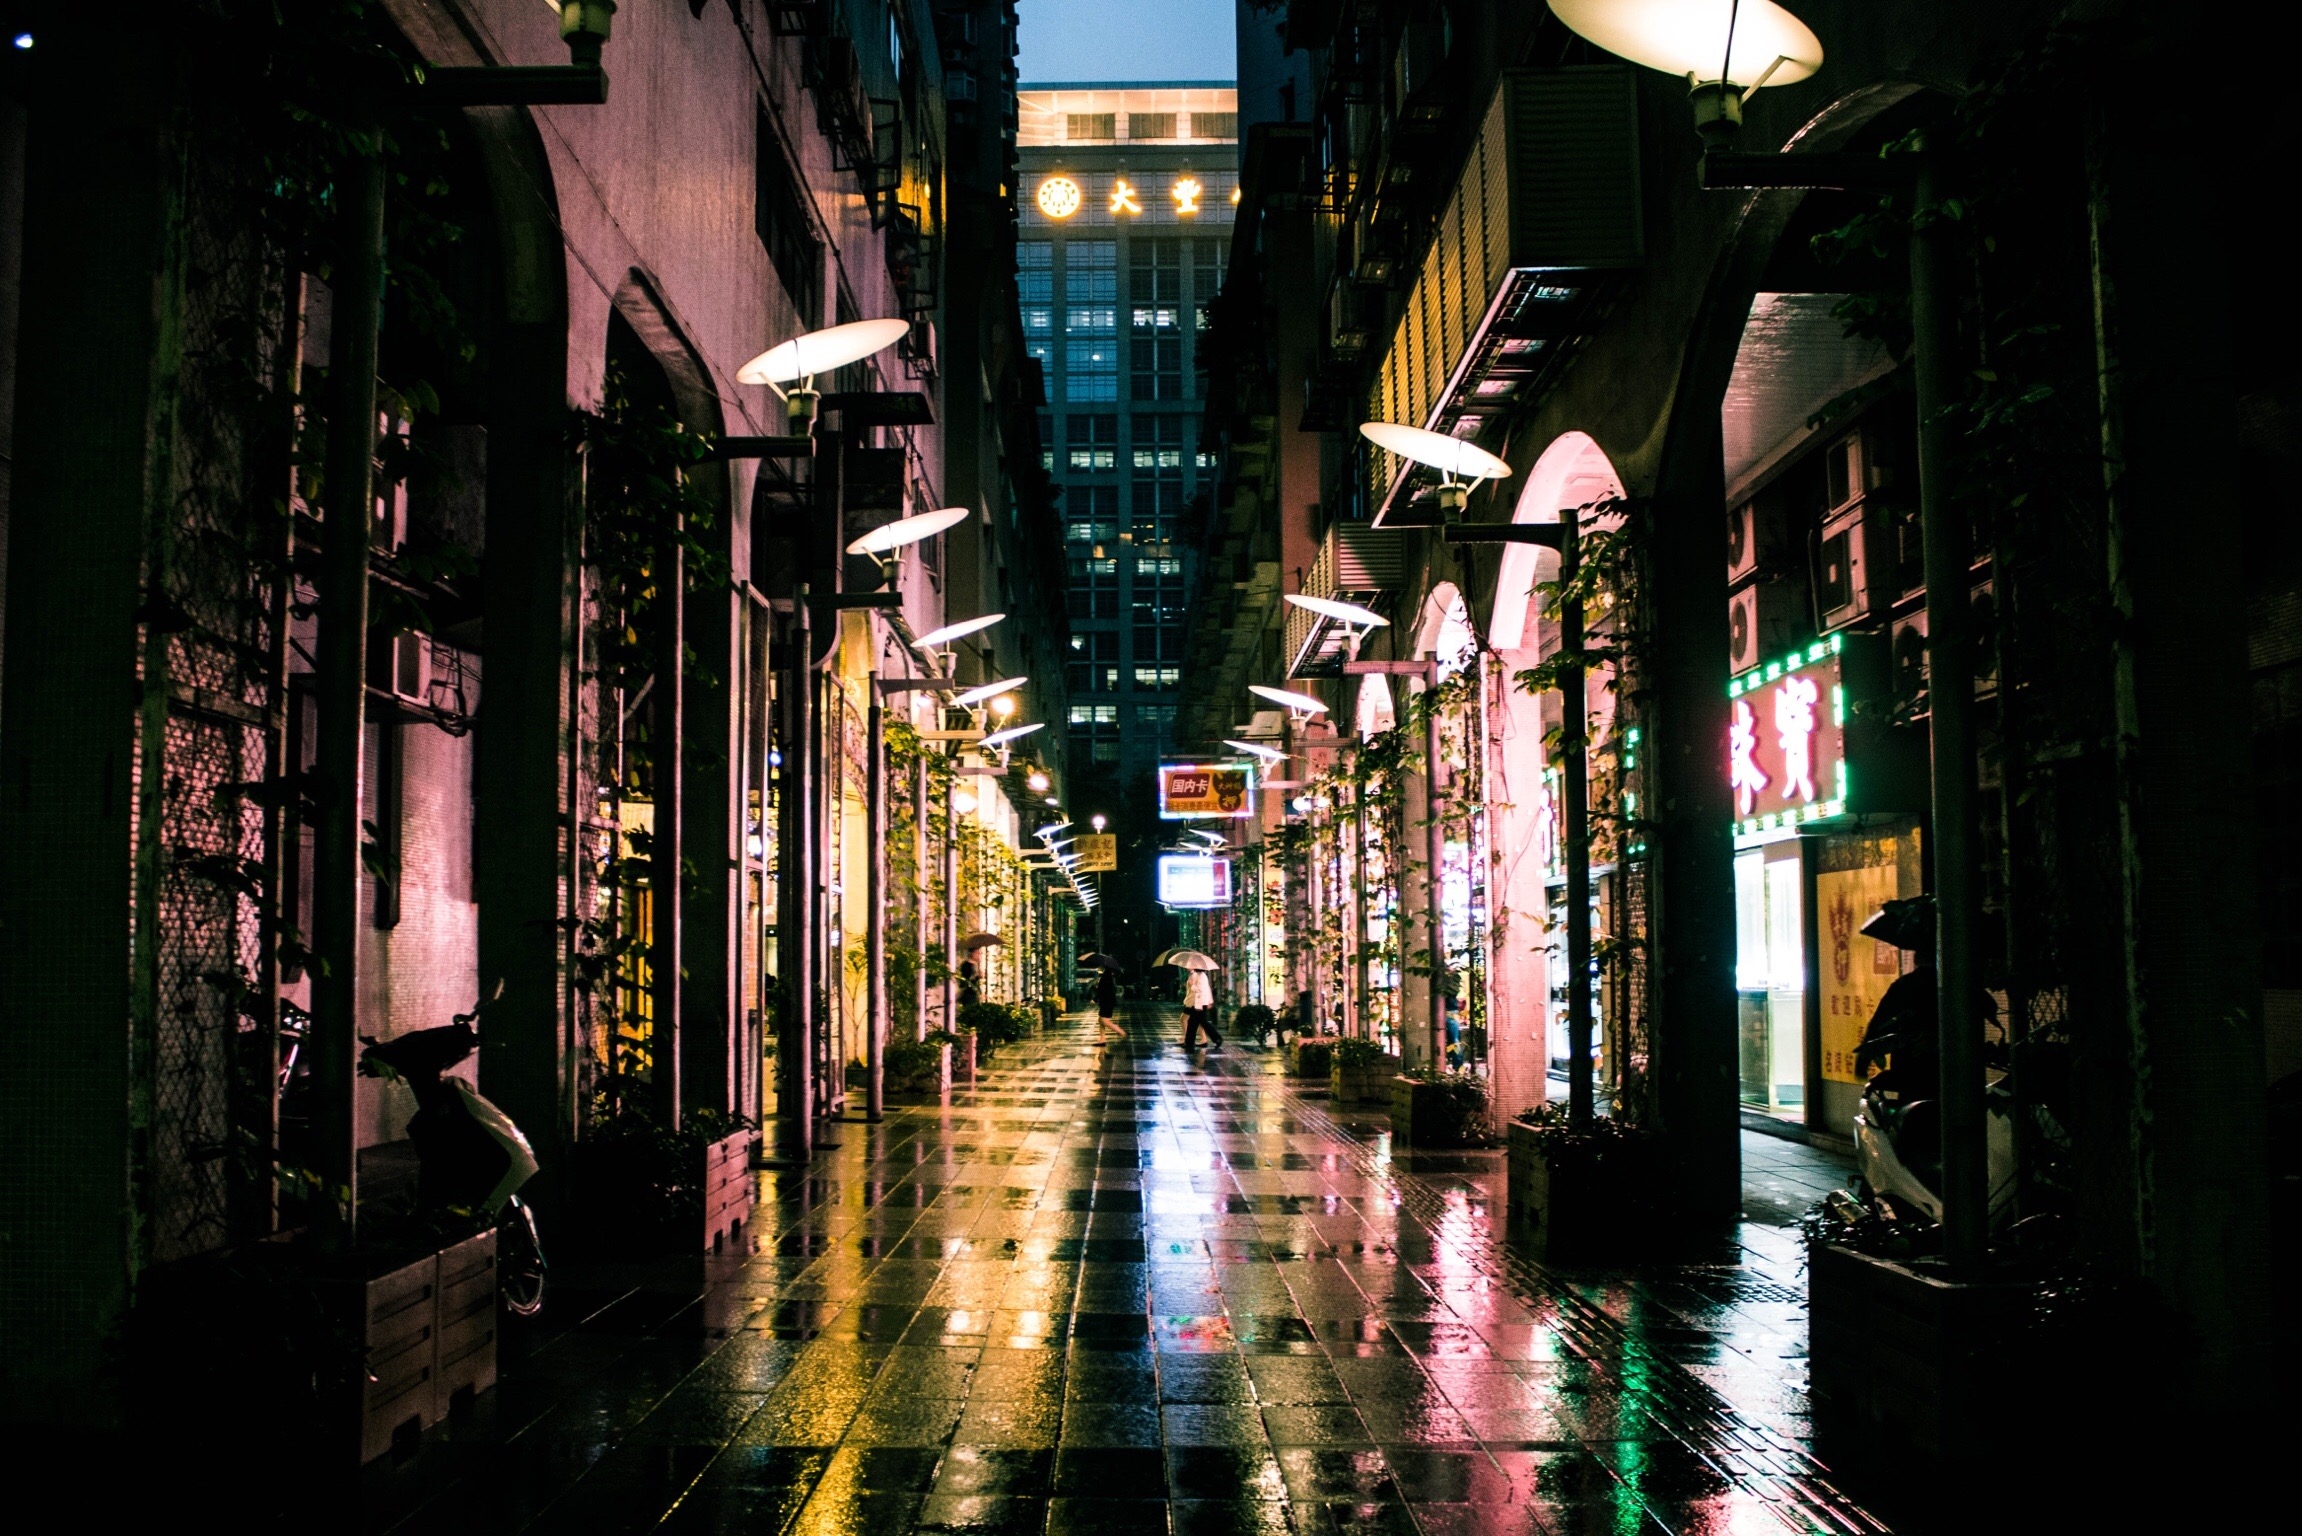 dark empty street in an Asian city at night, illustrating the connection between COVID-19 and human trafficking, where much the exploitation moved to online virtual spaces